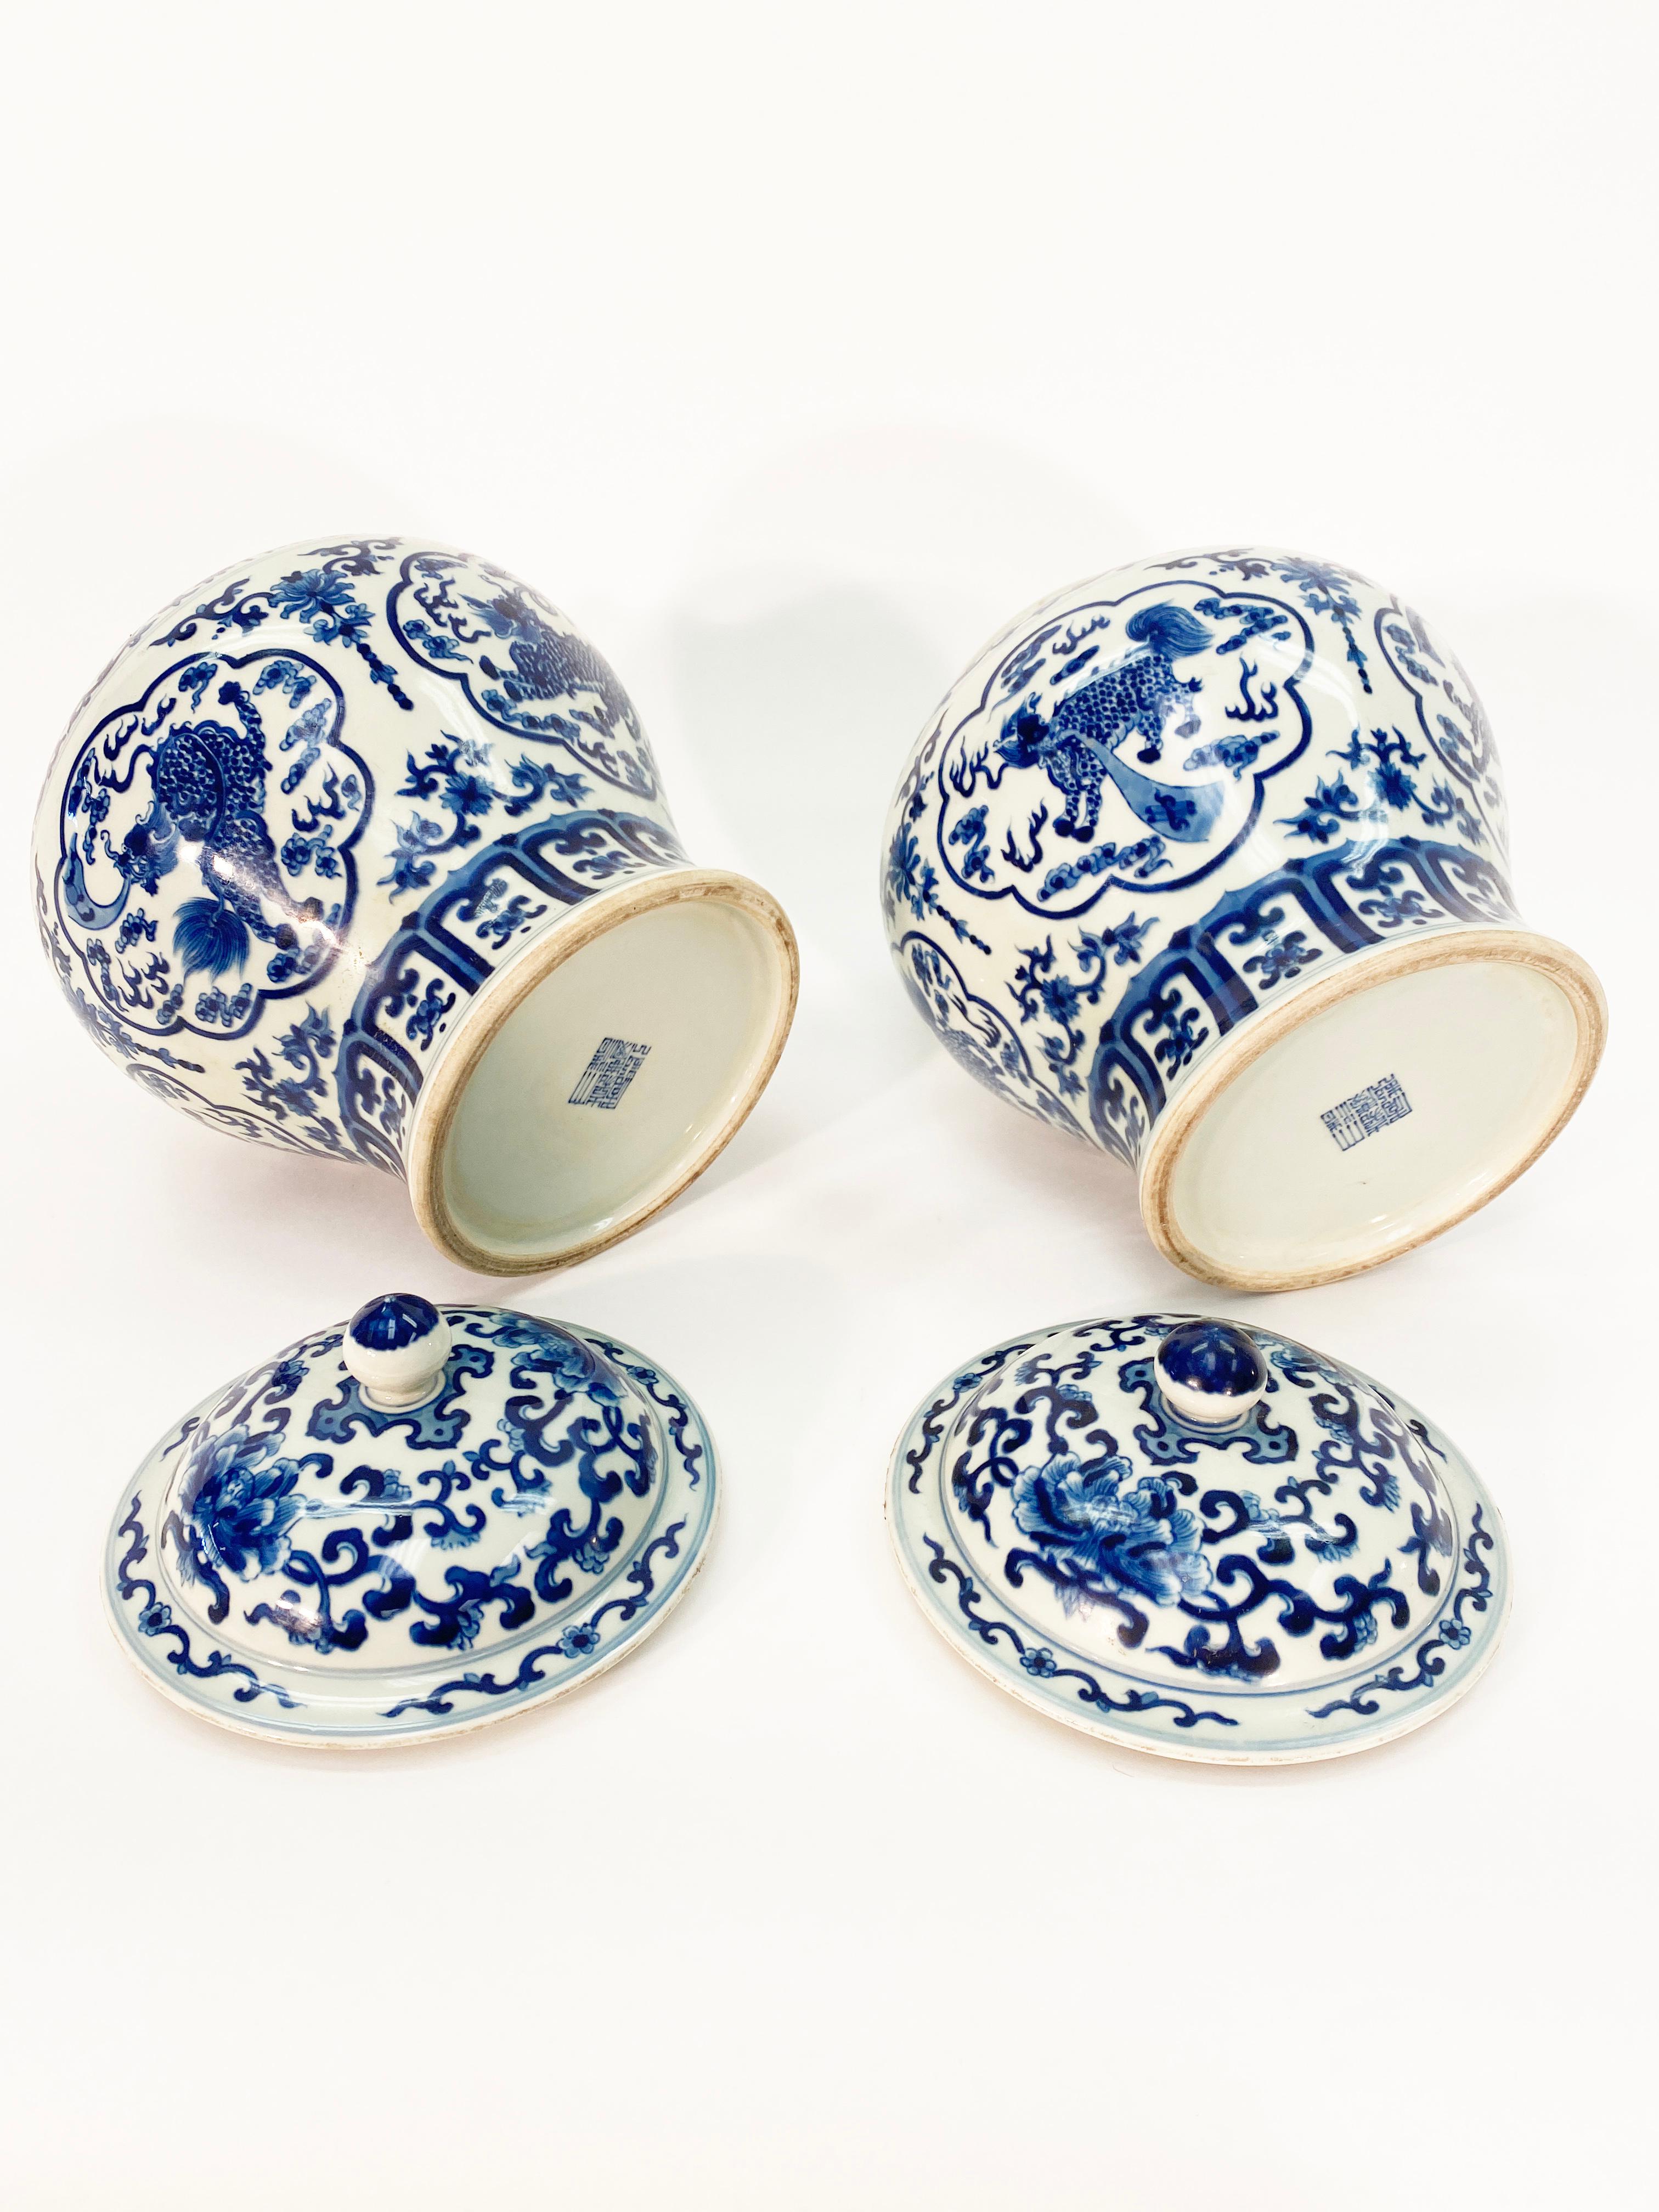 Chinese Export Pair of Blue and White Chinese Ginger Jars